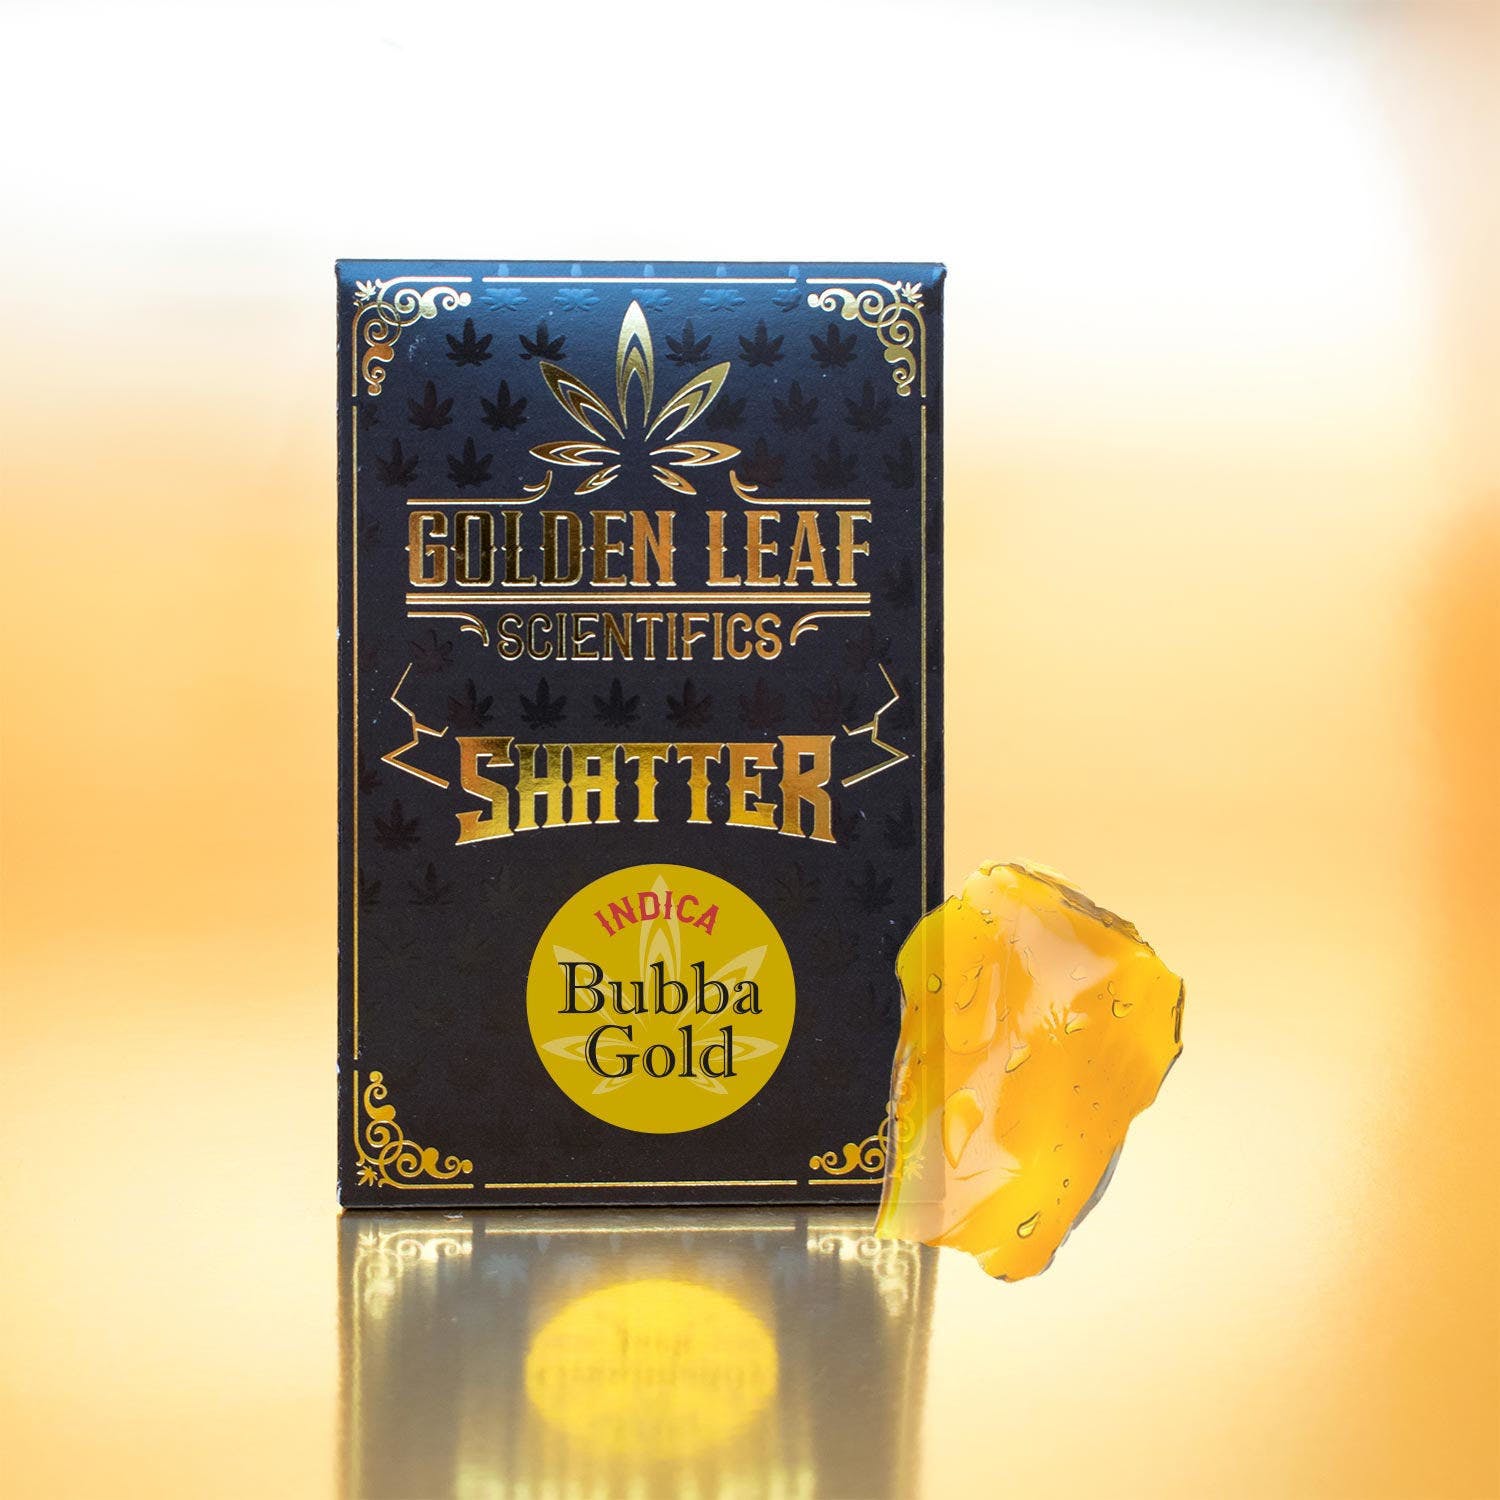 Bubba Gold Shatter